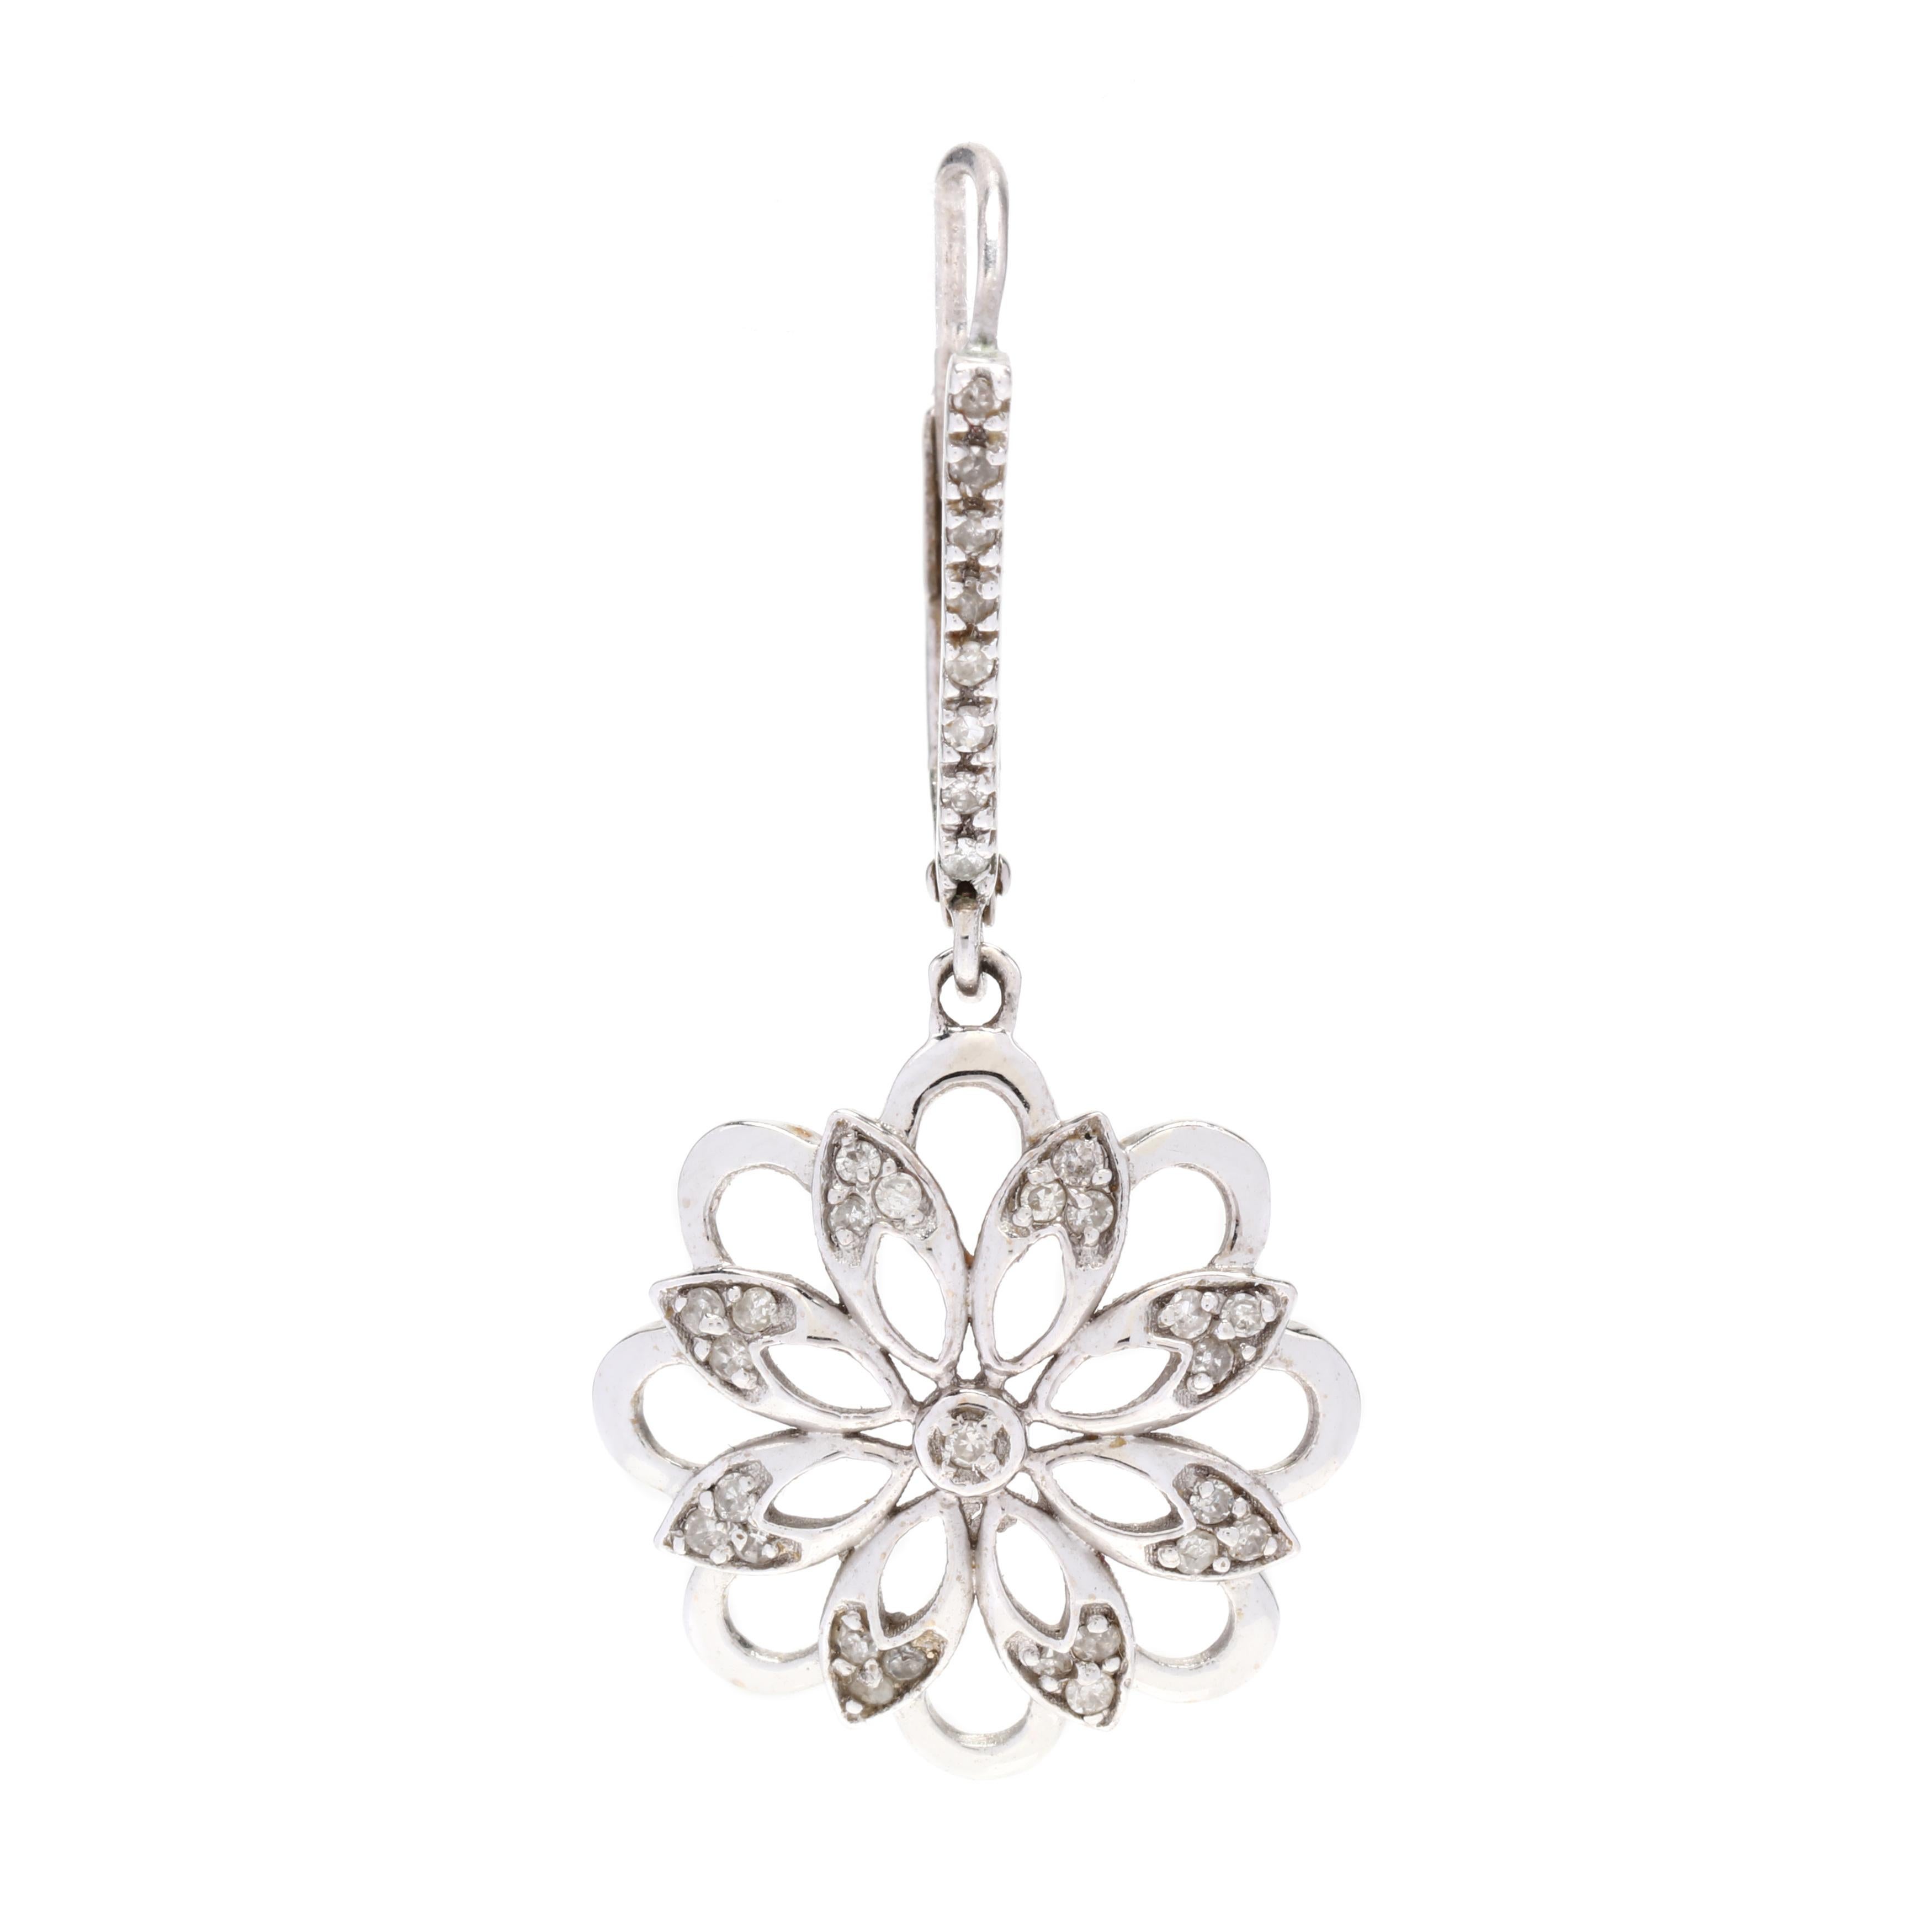 A pair of 14 karat white gold diamond flower dangle earrings. These earrings feature an open floral design suspended from ear wires with latch backs and set with single cut round diamonds weighing approximately .33 total carats.



Stones:

-